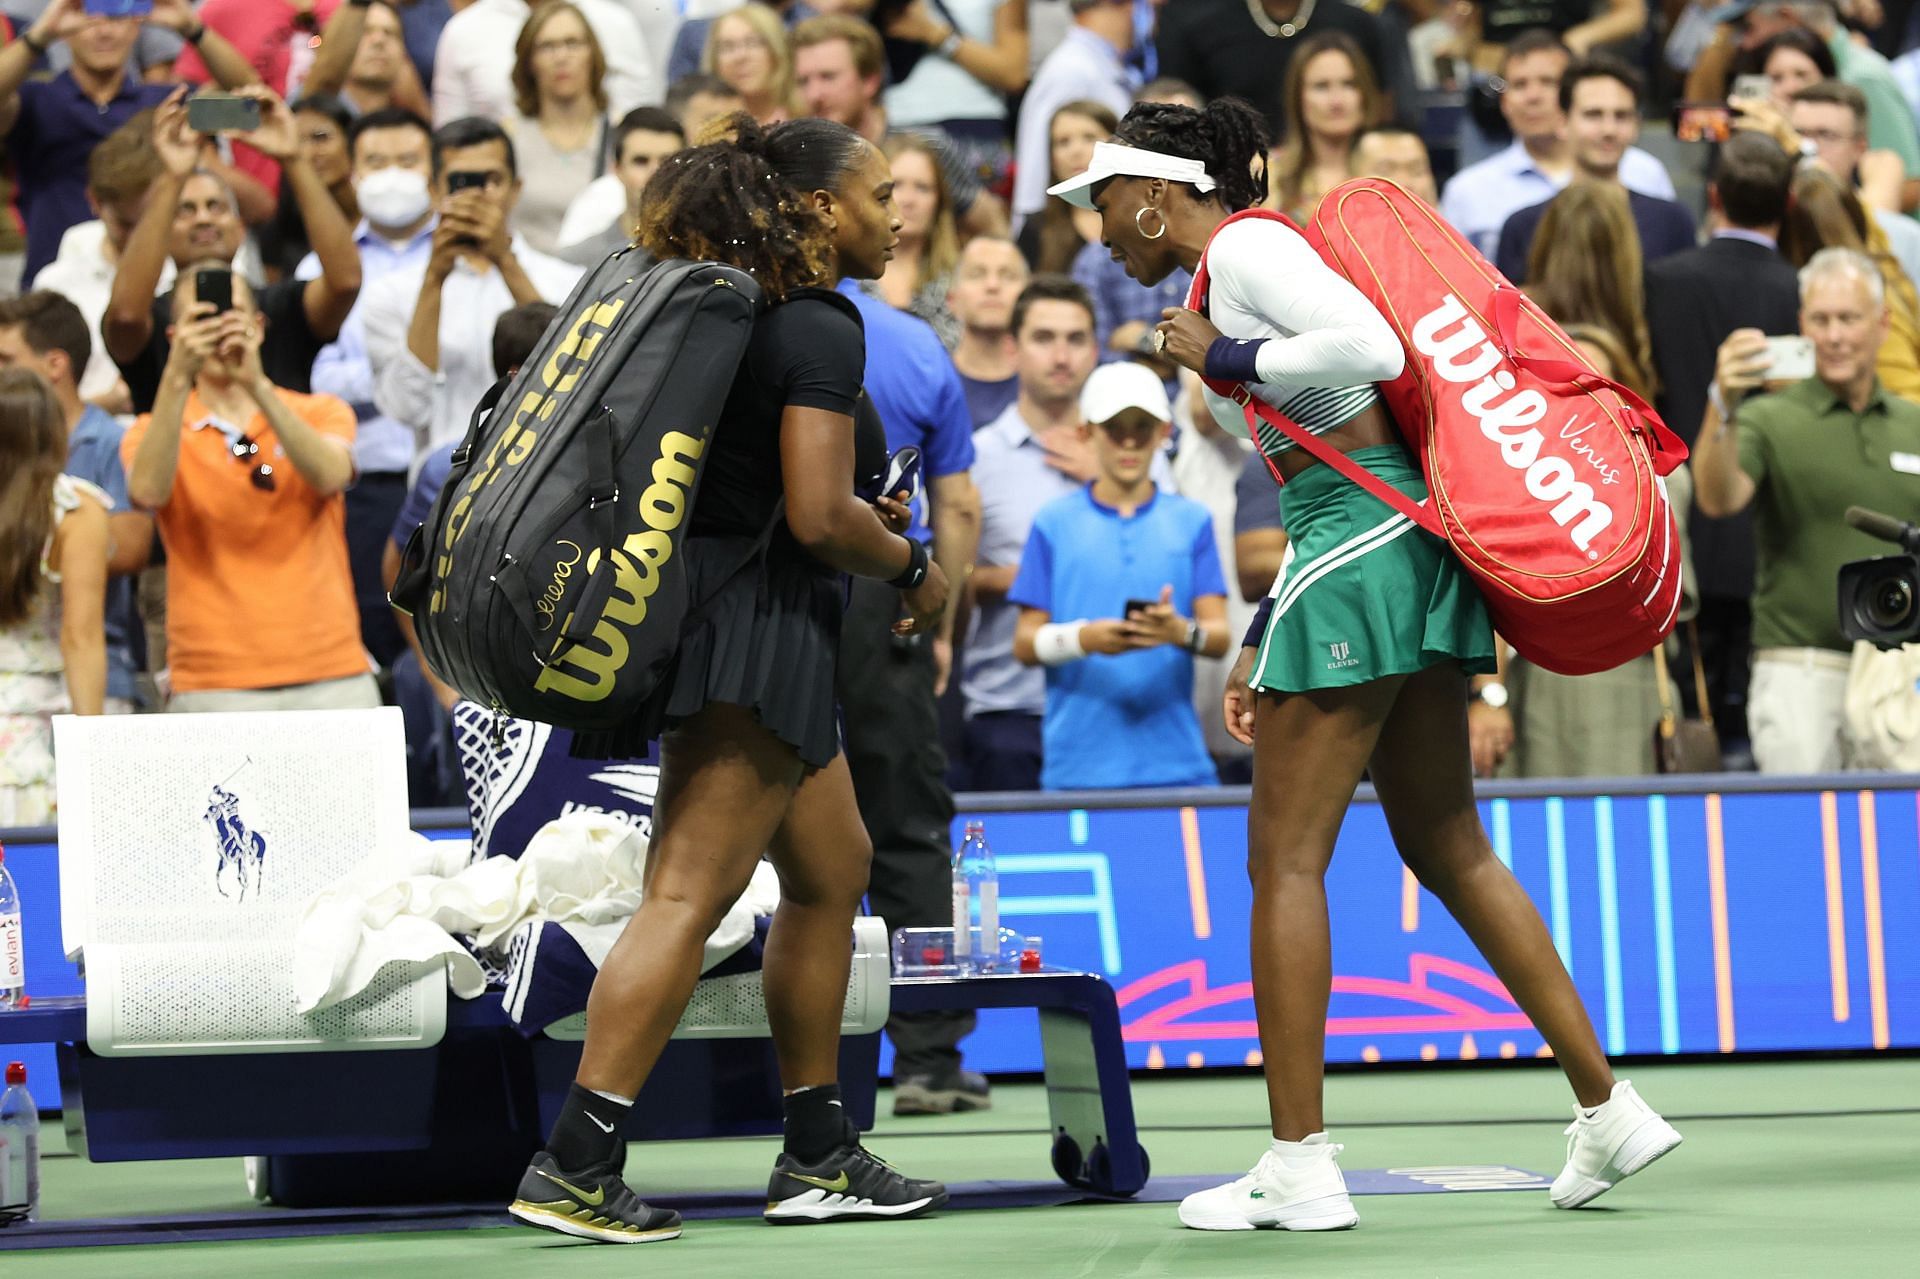 Serena Williams and Venus Williams prepare to leave the court at the 2022 US Open - Day 4